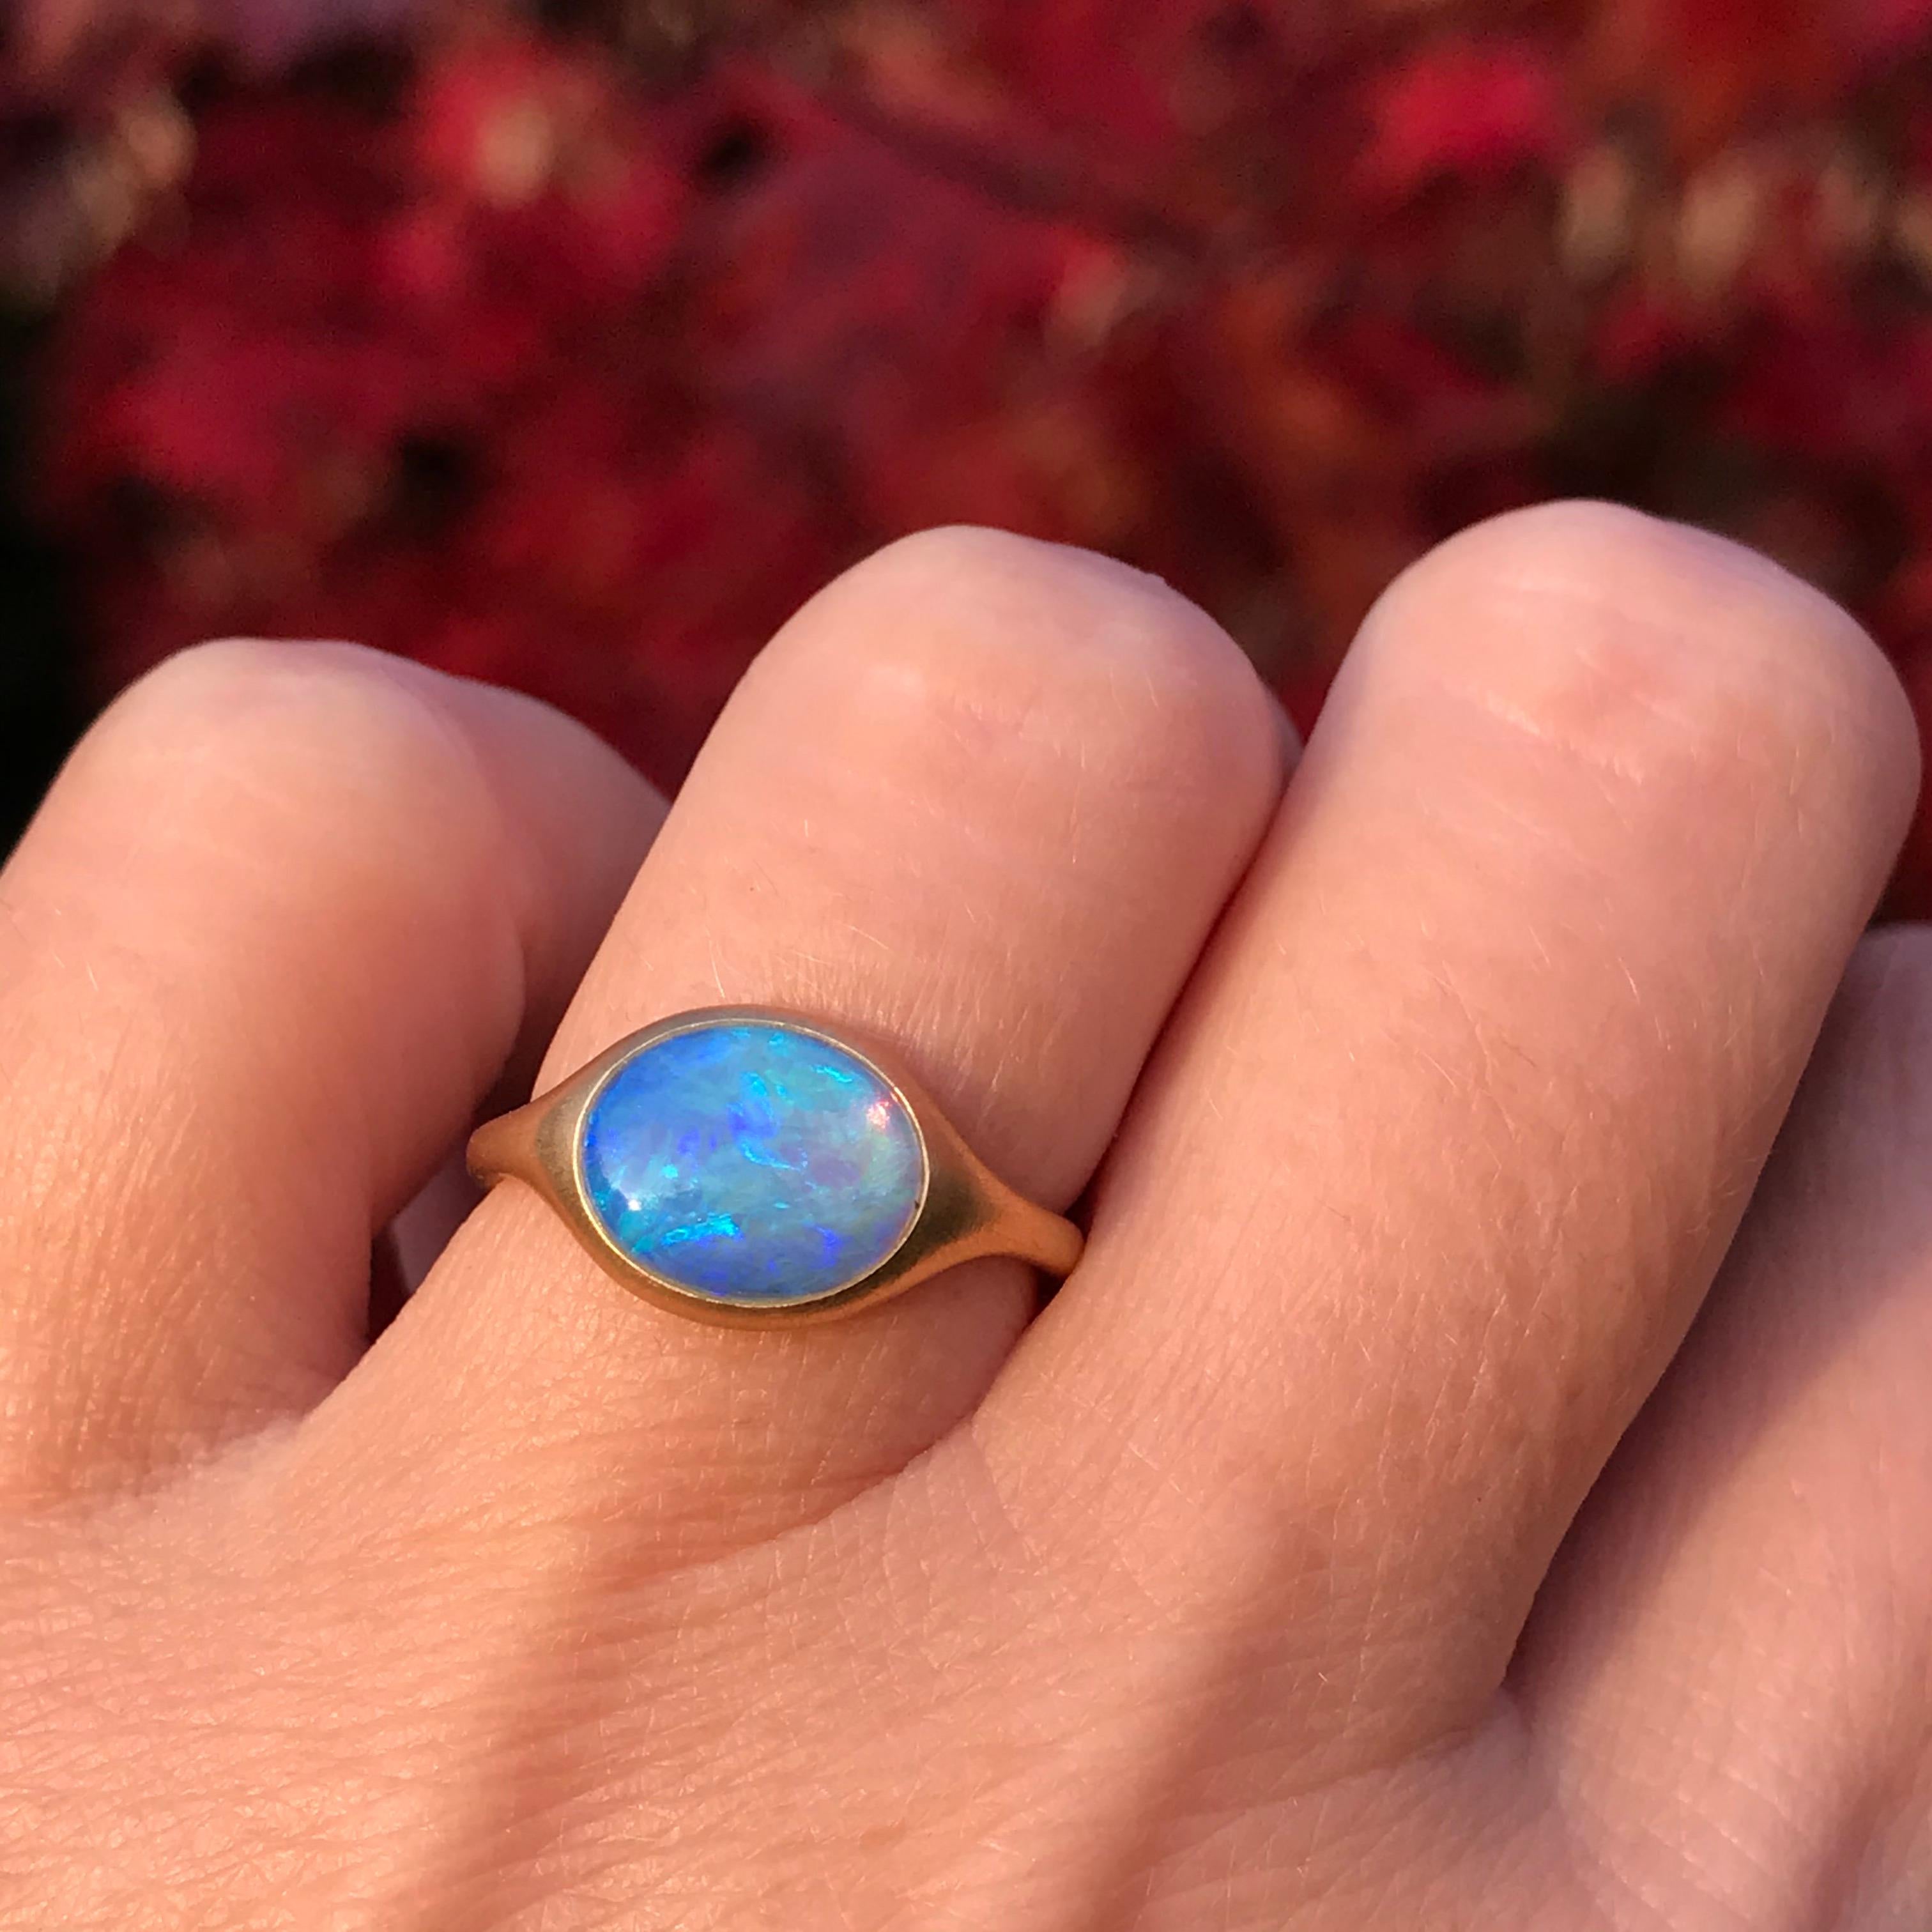 Dalben design 18k yellow gold semilucid finishing ring with a  1,54 carat bezel-set small oval cabochon Australian Opal .   
Ring size 5 3/4 - EU 51 re-sizable to most finger sizes. 
Opal dìimension : 10 x 8 mm 
Bezel setting dimension: 
width 11,8